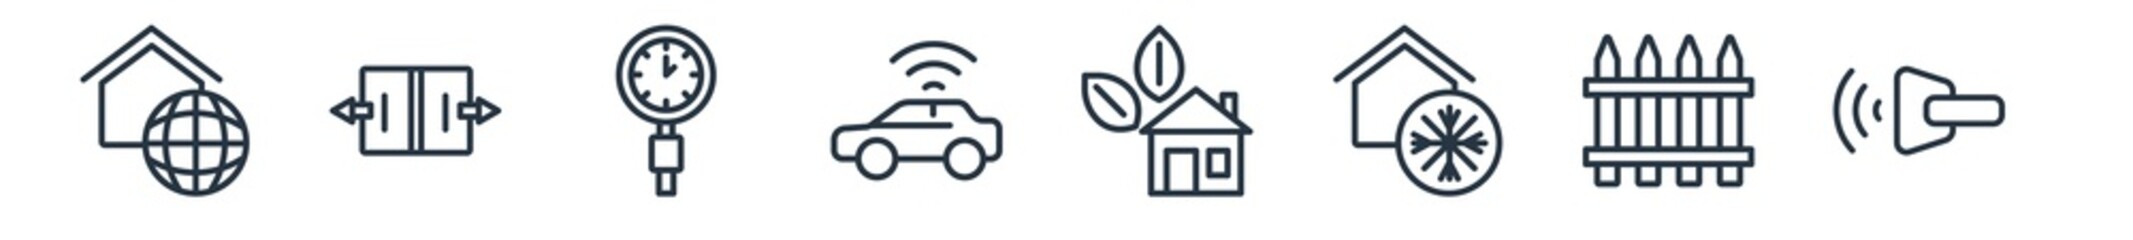 linear set of smart house outline icons. line vector icons such as access, automated door, meter, autonomous car, eco home, virtual reality vector illustration.